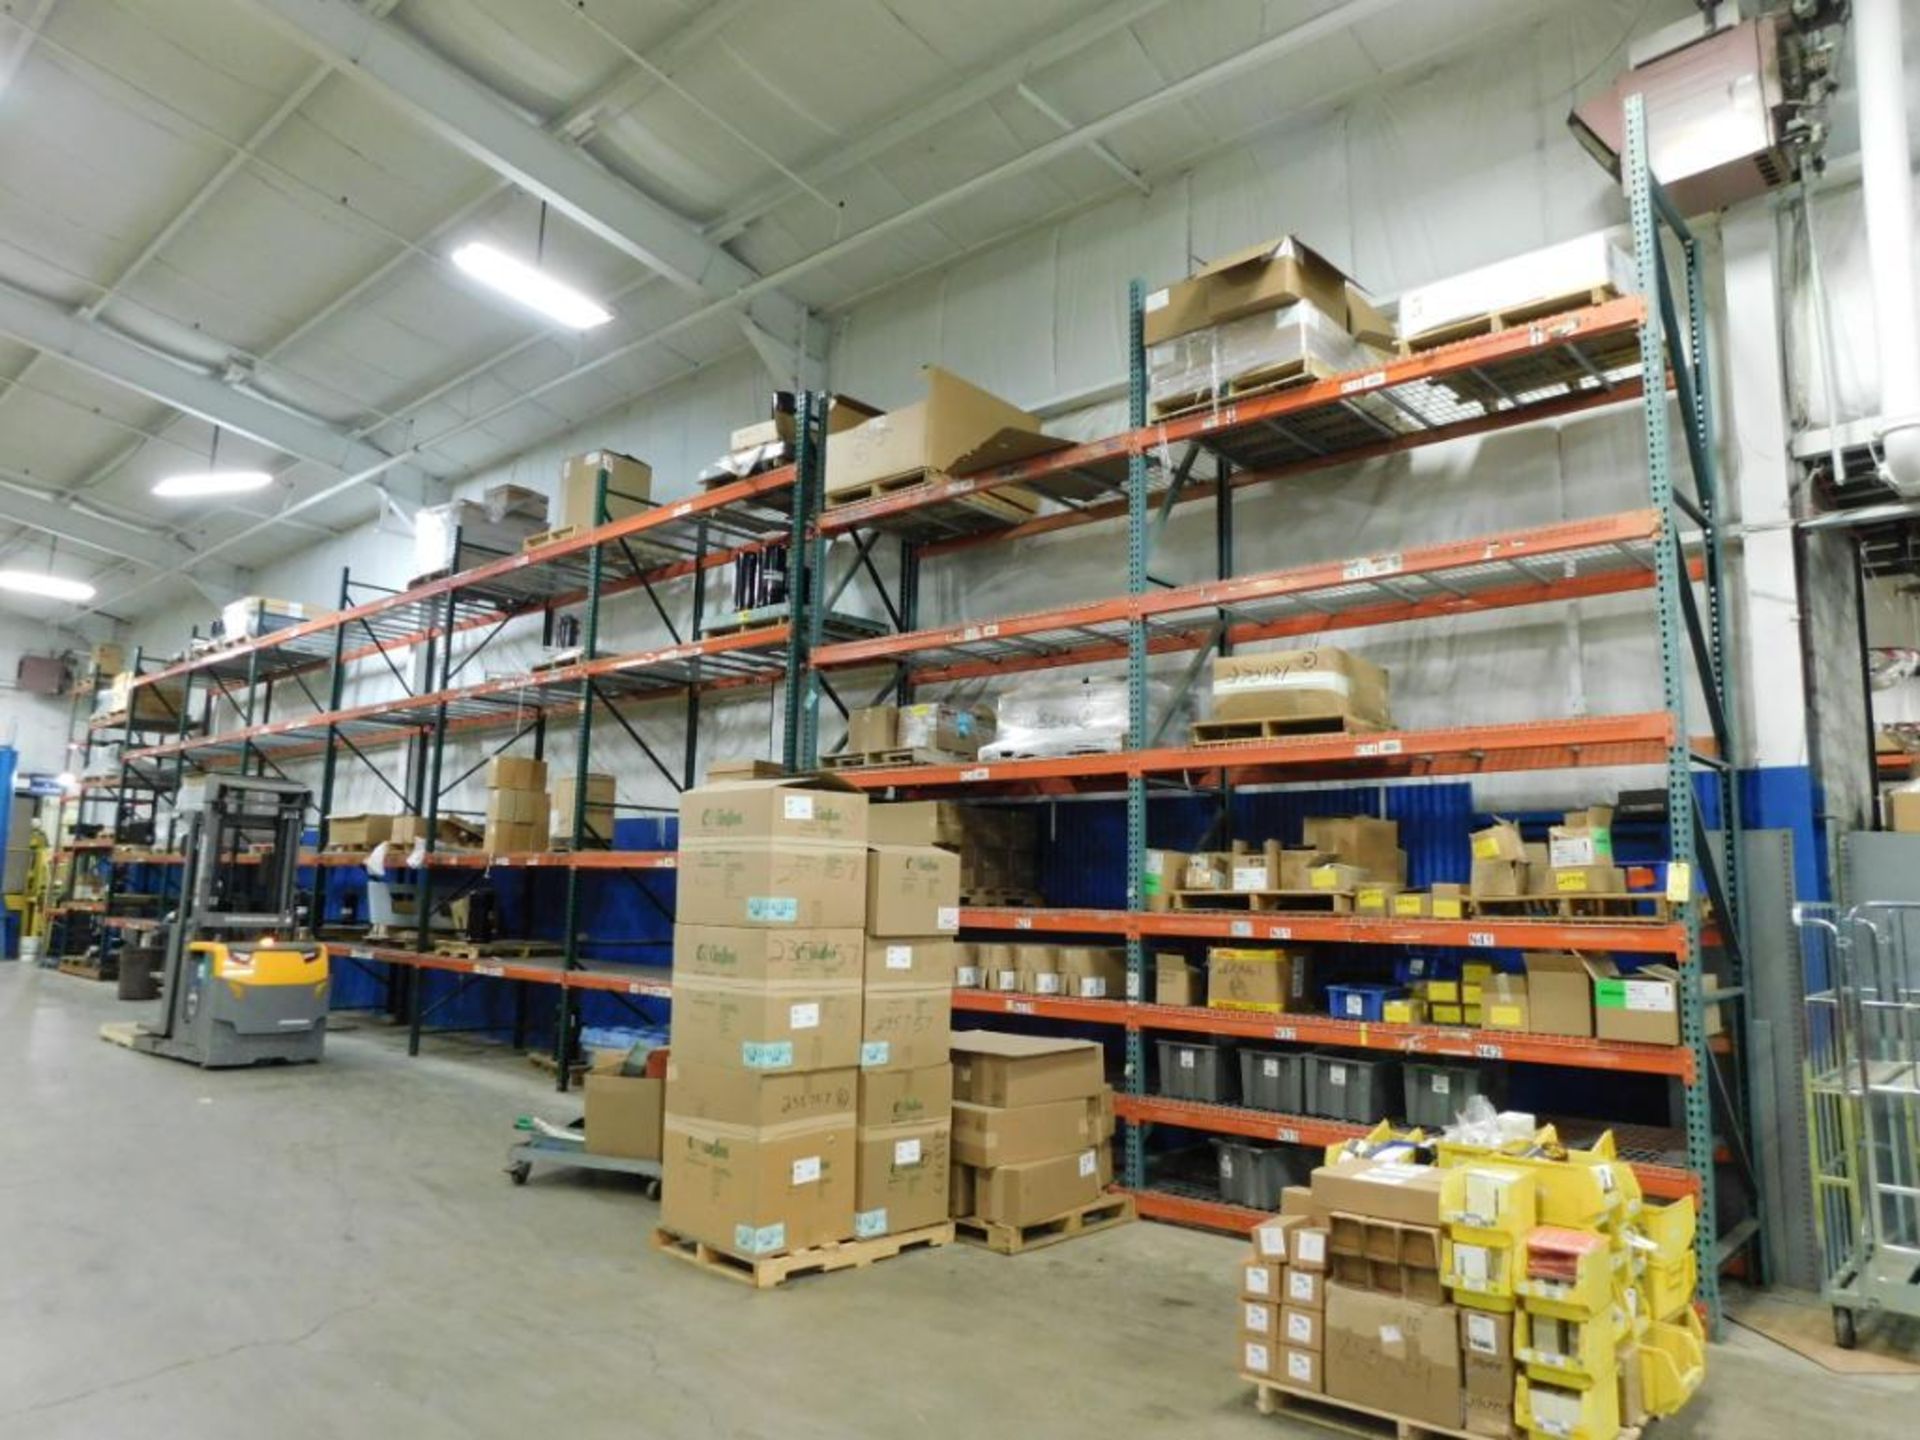 LOT CONSISTING OF: (7) sections of pallet racks, 18' ht. x 48" dp. x 8' W., (2) sections of pallet